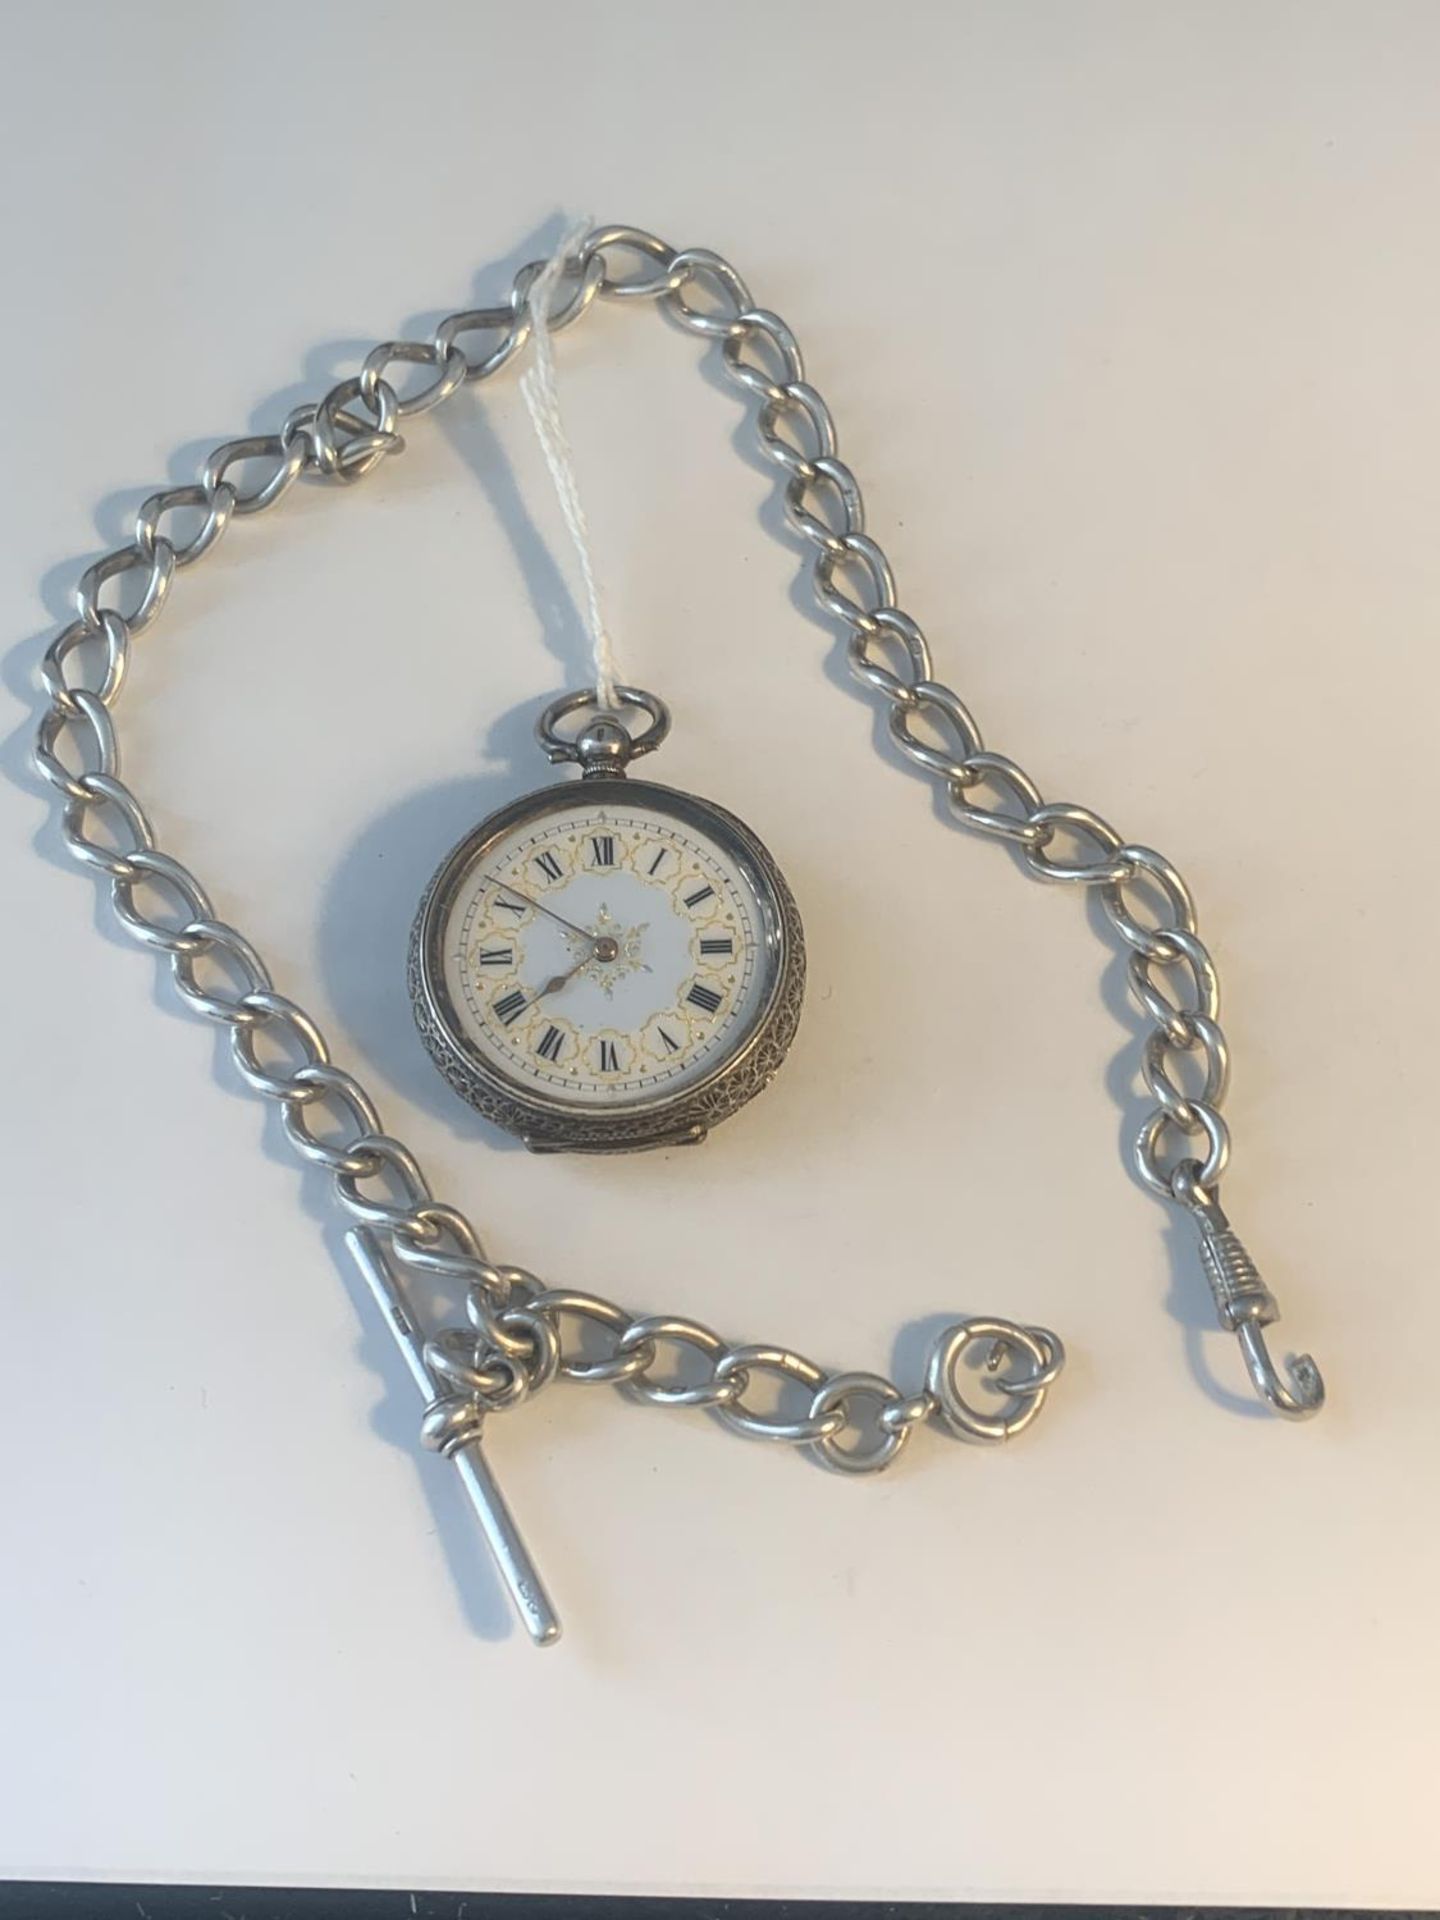 A MARKED 935 SILVER LADIES POCKET WATCH WITH DECORATIVE FACE AND CASE WITH A MARKED T BAR CHAIN